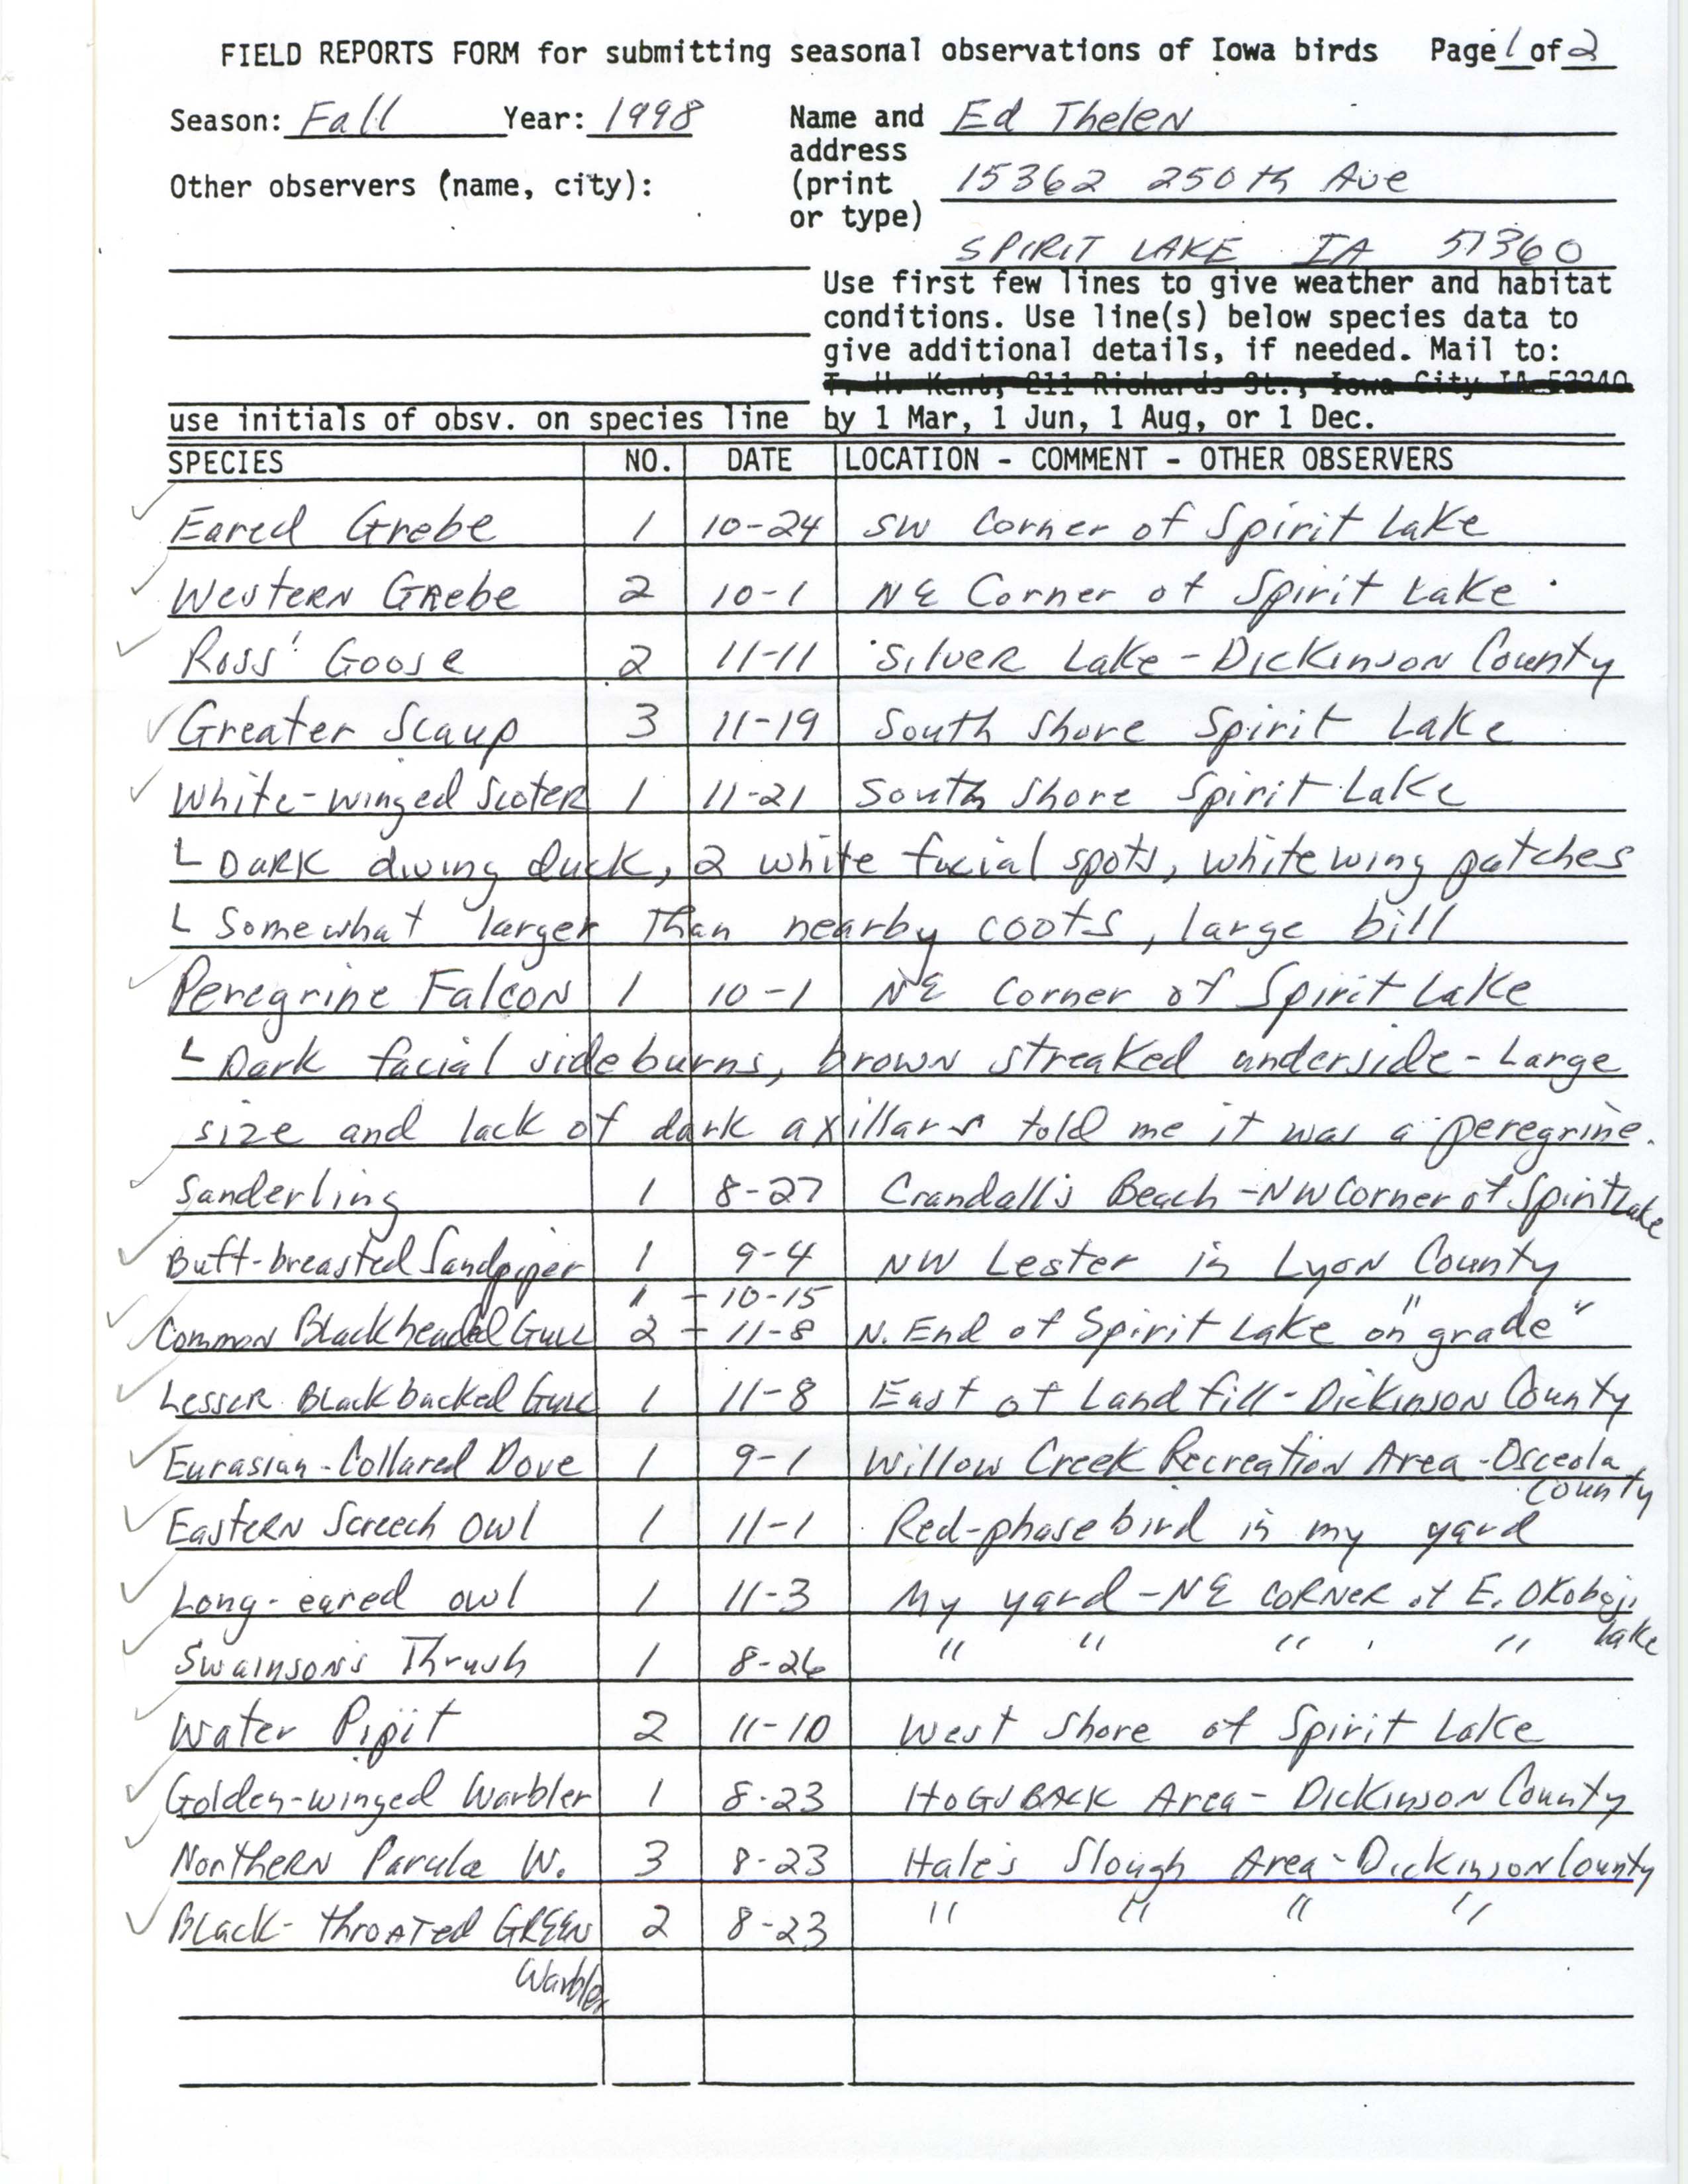 Field reports form for submitting seasonal observations of Iowa birds, Ed Thelen, fall 1998